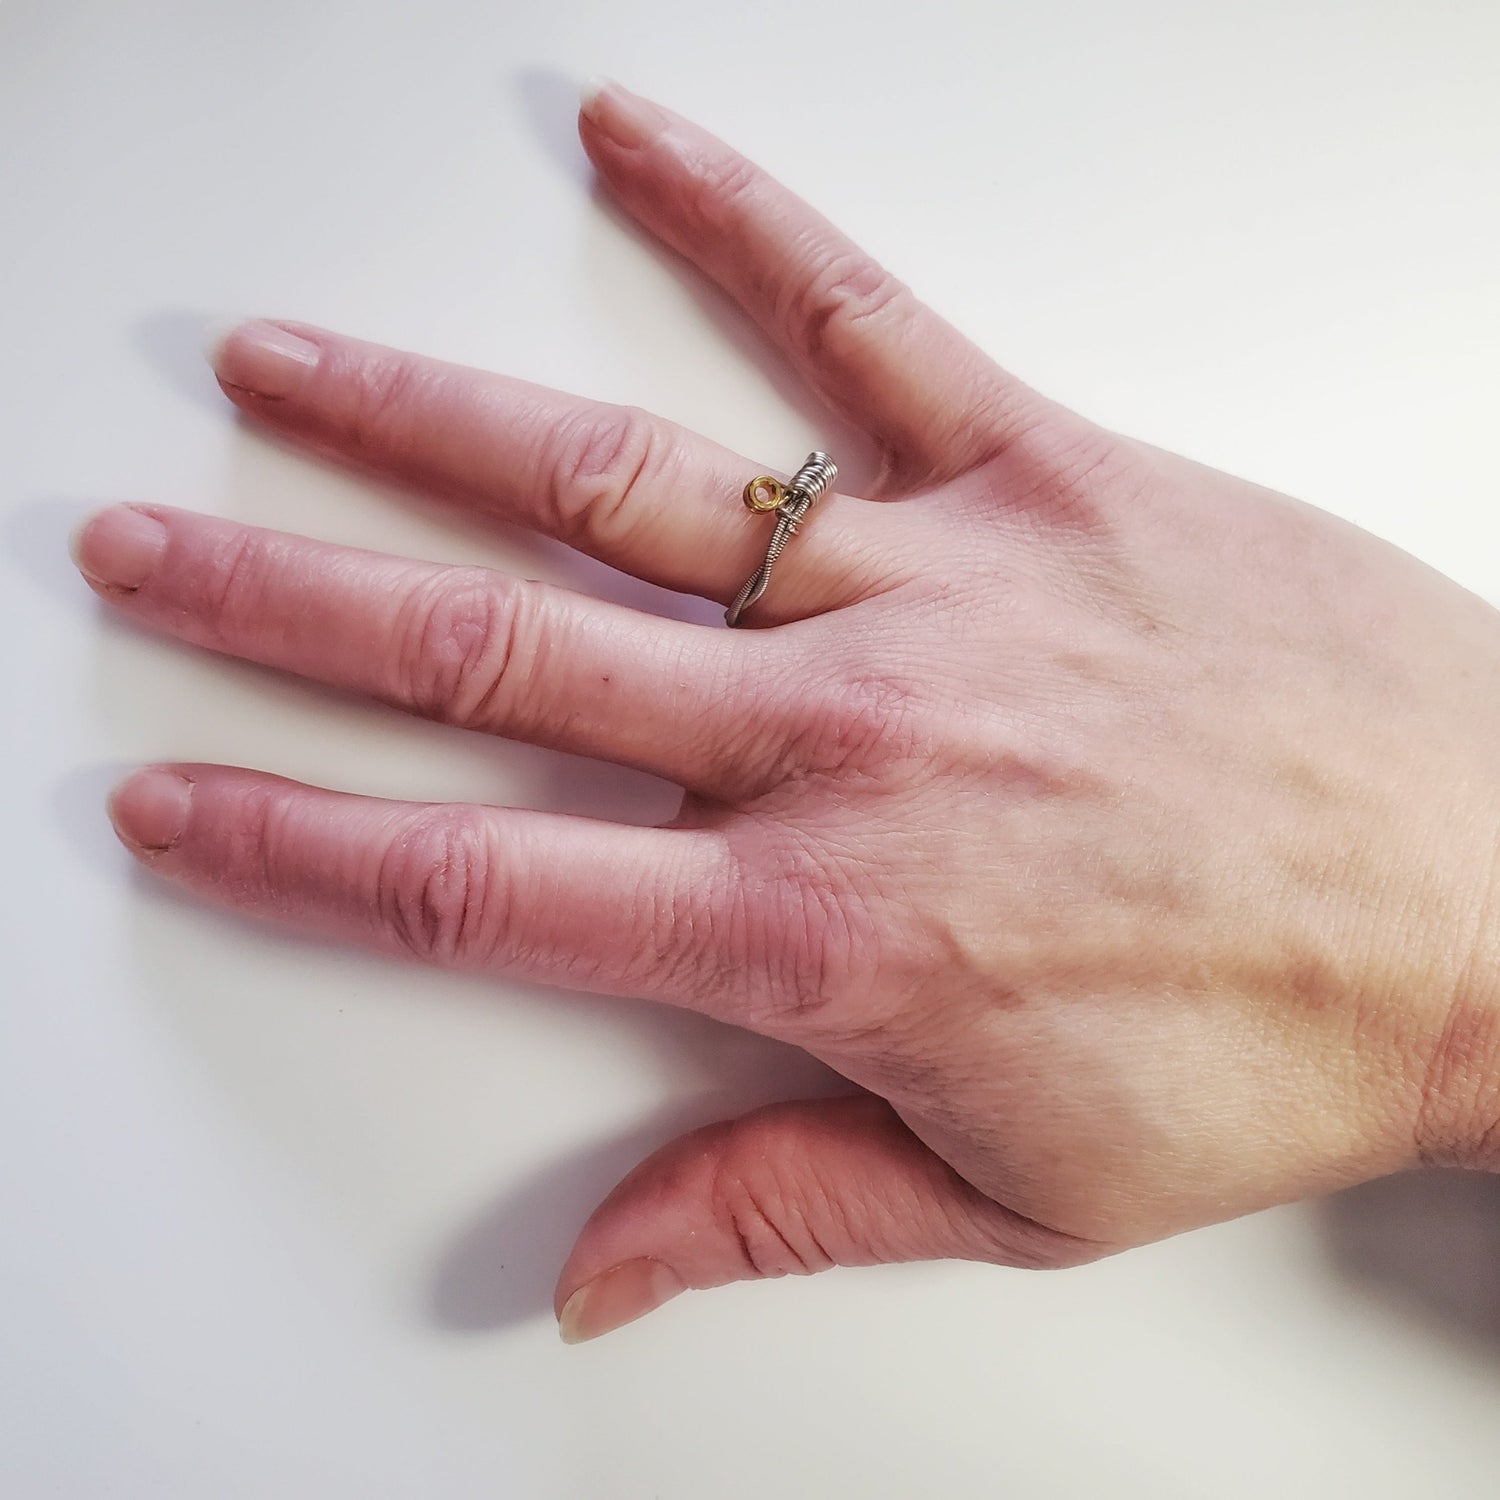 a woman's hand wearing a guitar string ring - white background